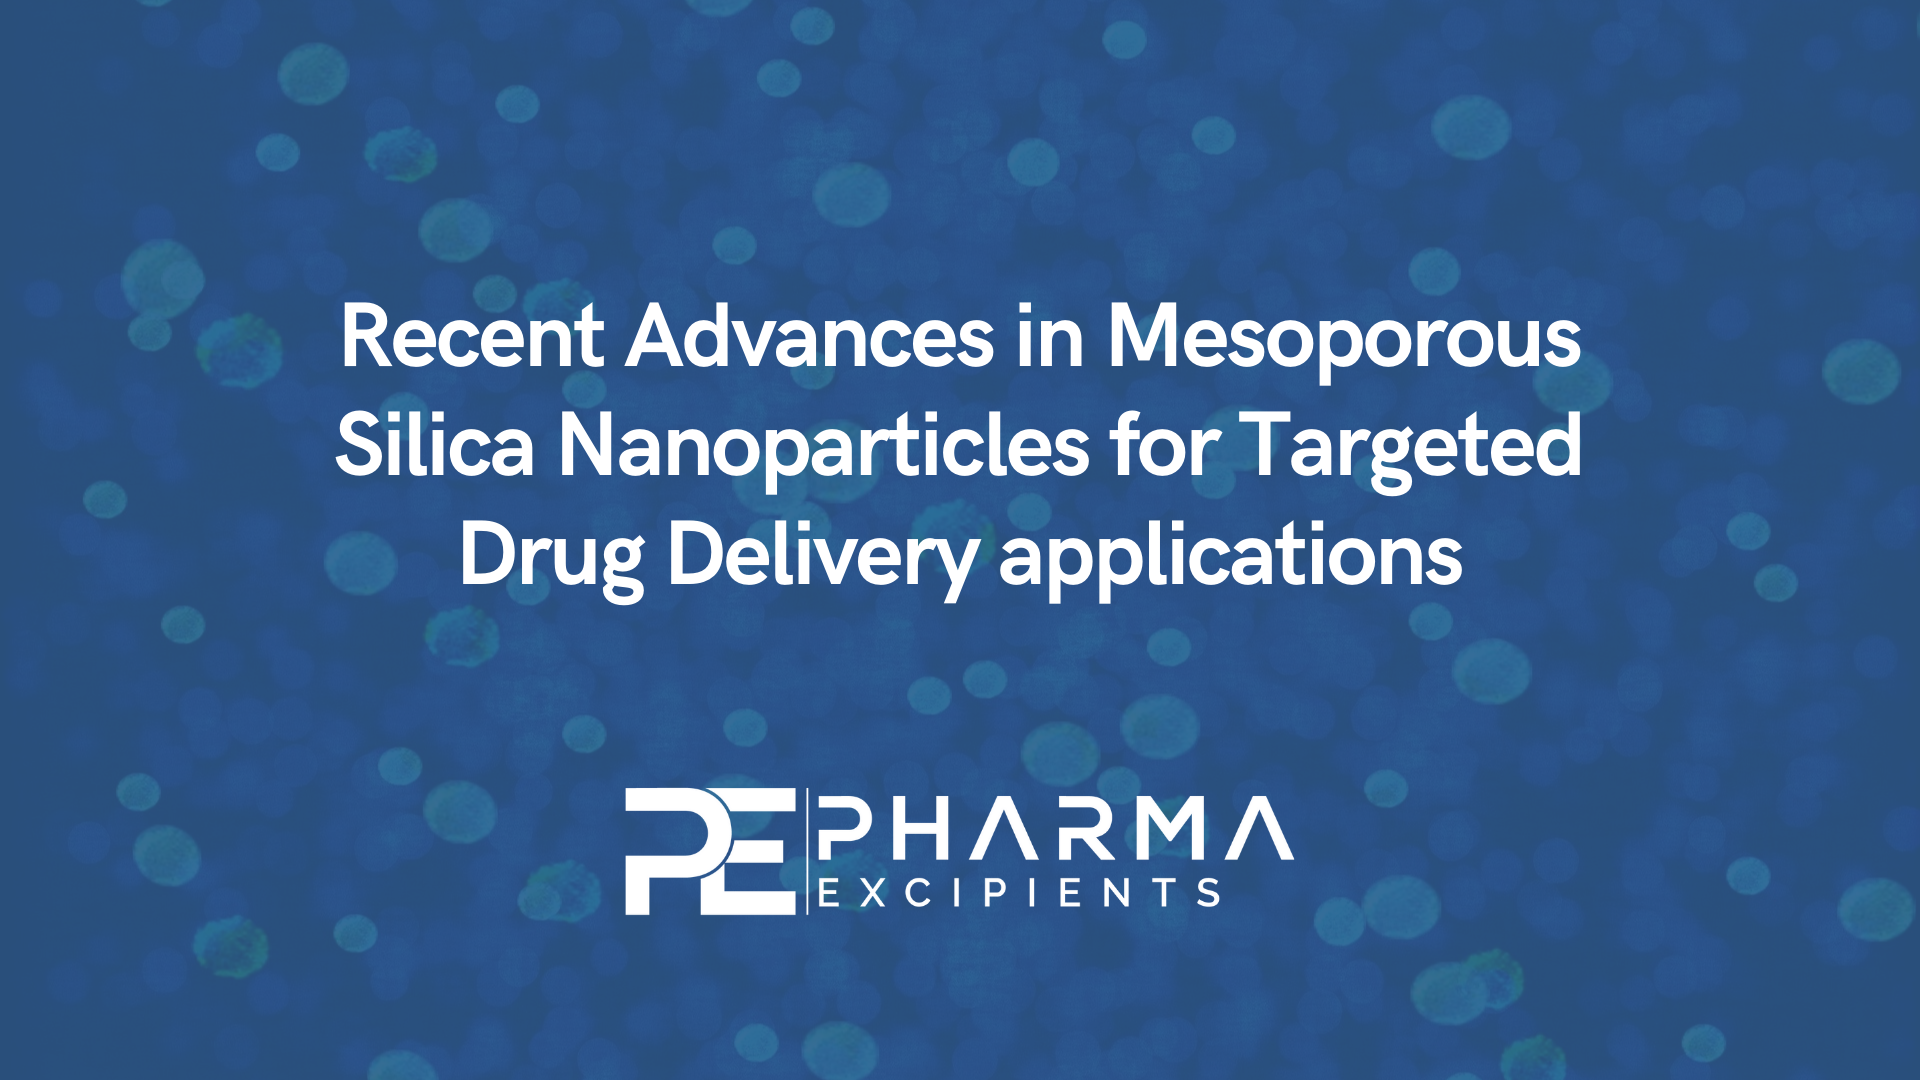 Recent Advances in Mesoporous Silica Nanoparticles for Targeted Drug Delivery applications